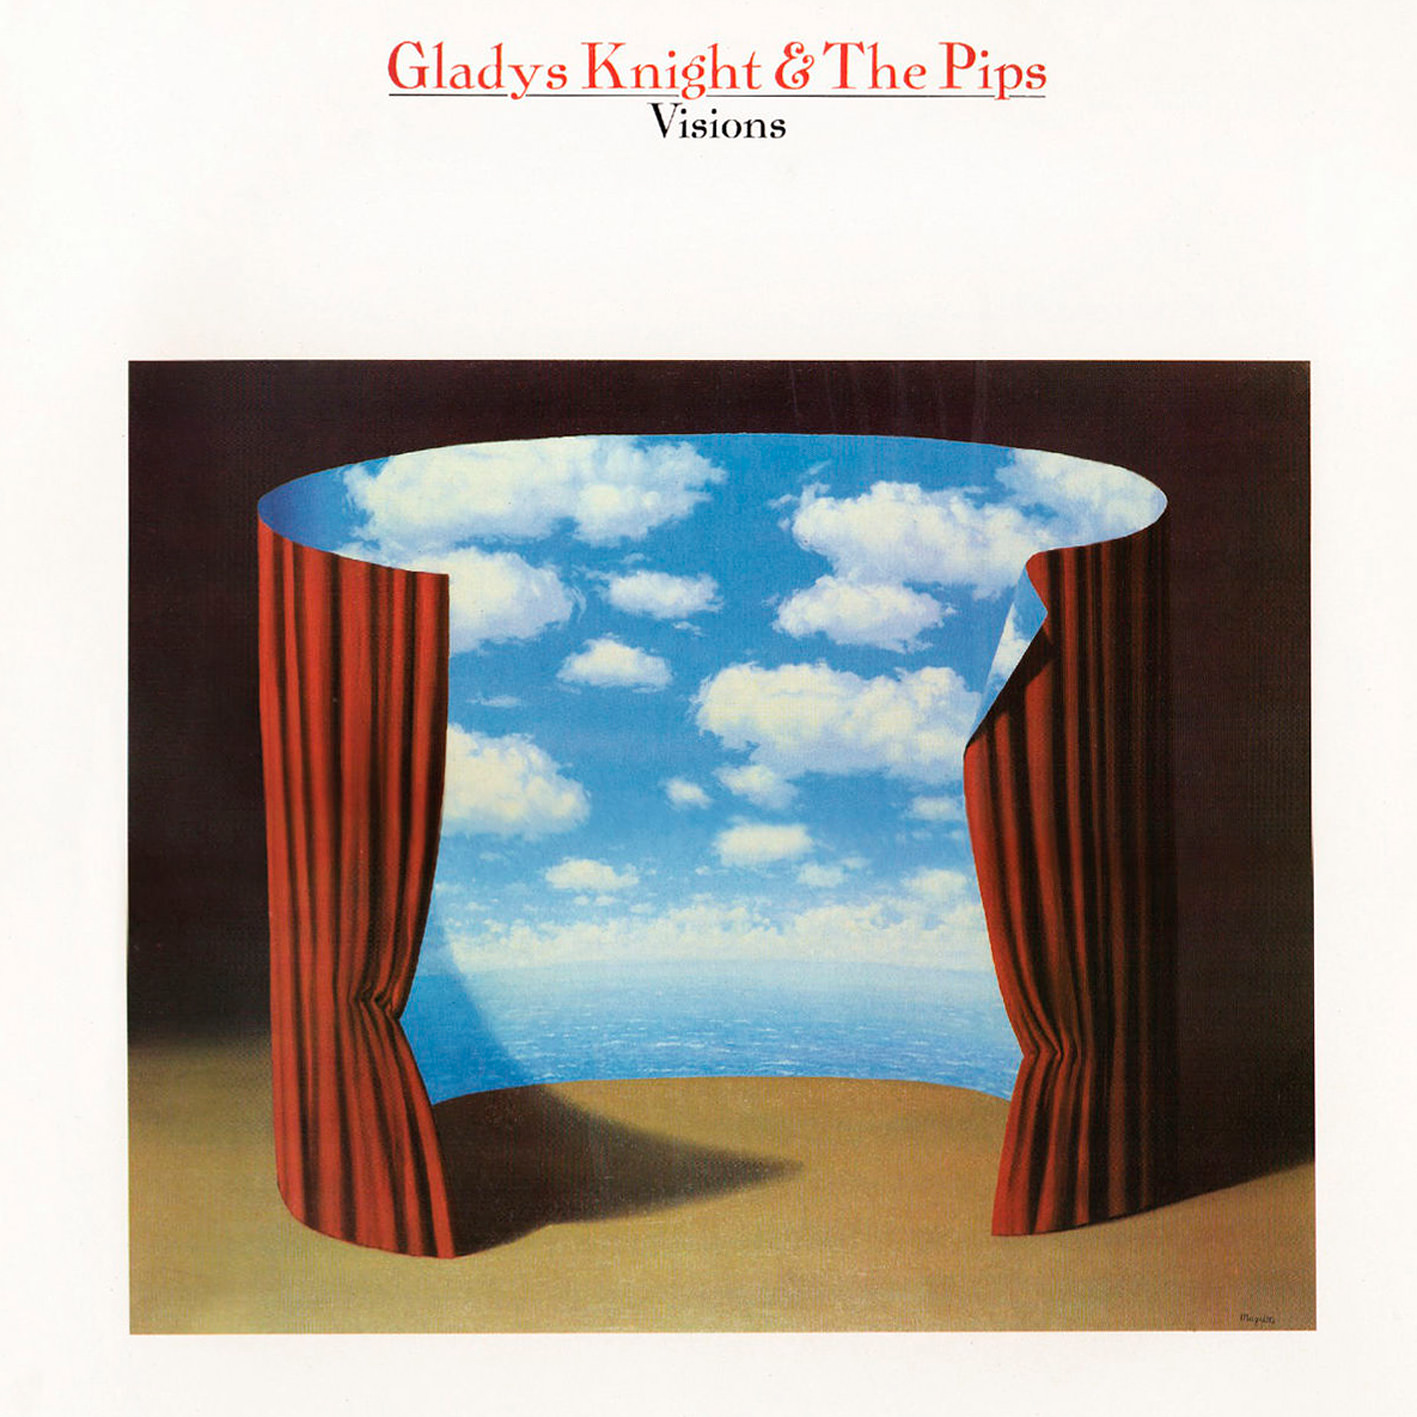 Gladys Knight & The Pips - Visions (1983/2015) {Expanded Edition 2014} [HDTracks FLAC 24bit/96kHz]